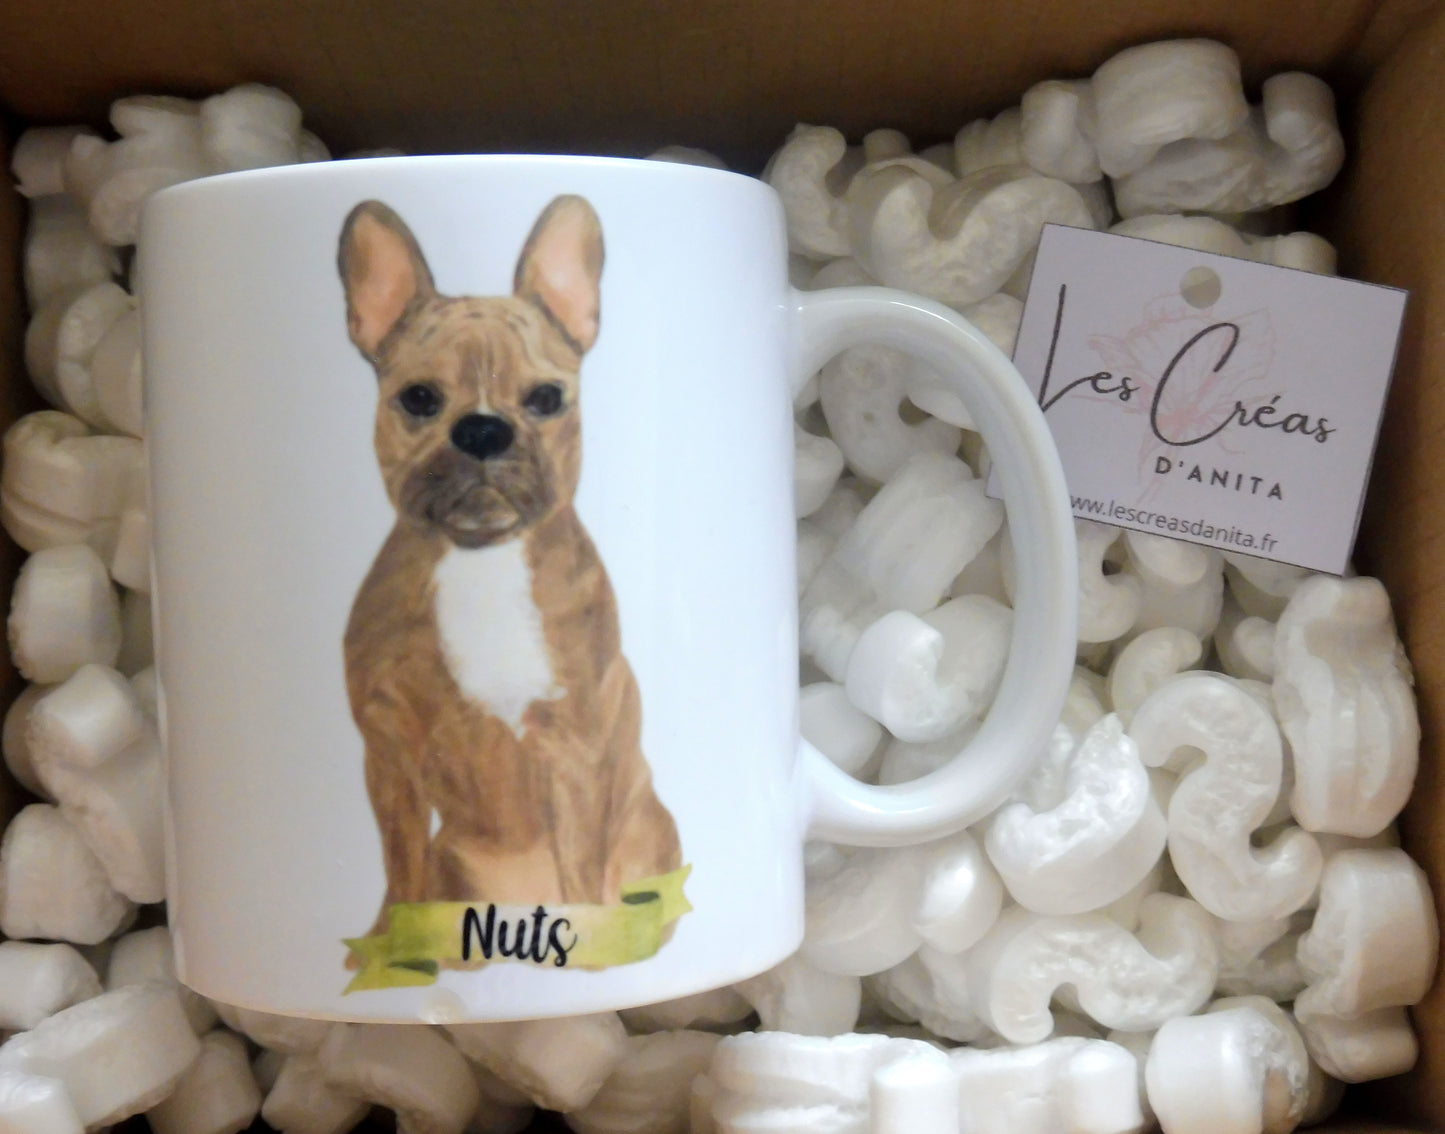 Fox terrier dog personalized mug and his first name